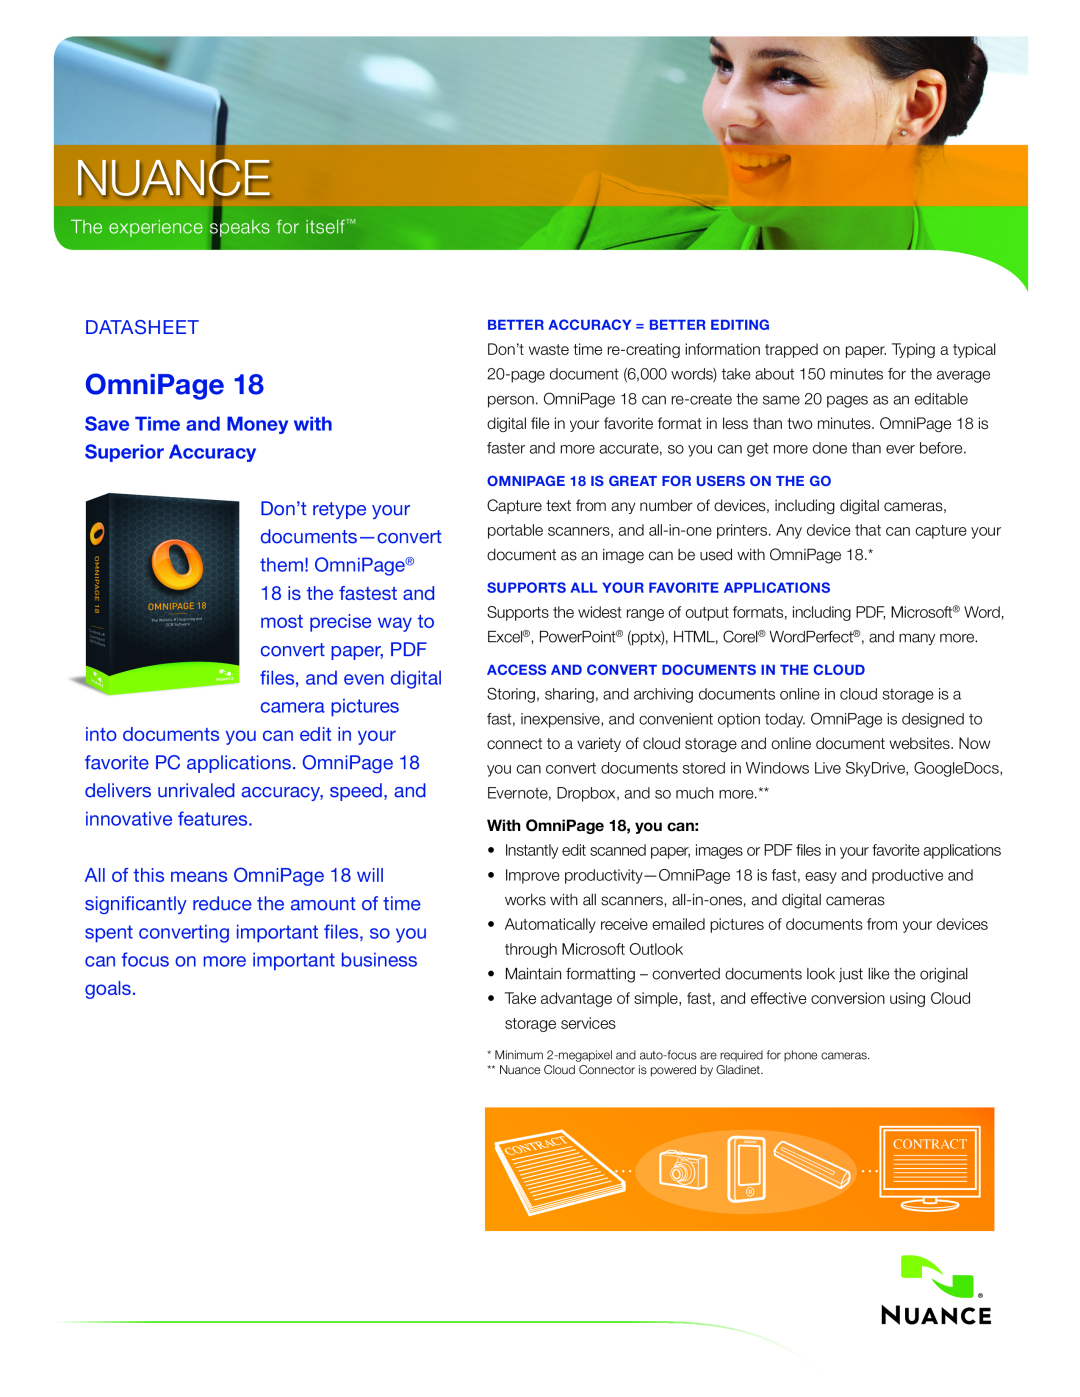 Nuance comm 2889A-G00-18.0 manual Nuance, OmniPage, Save Time and Money with Superior Accuracy 